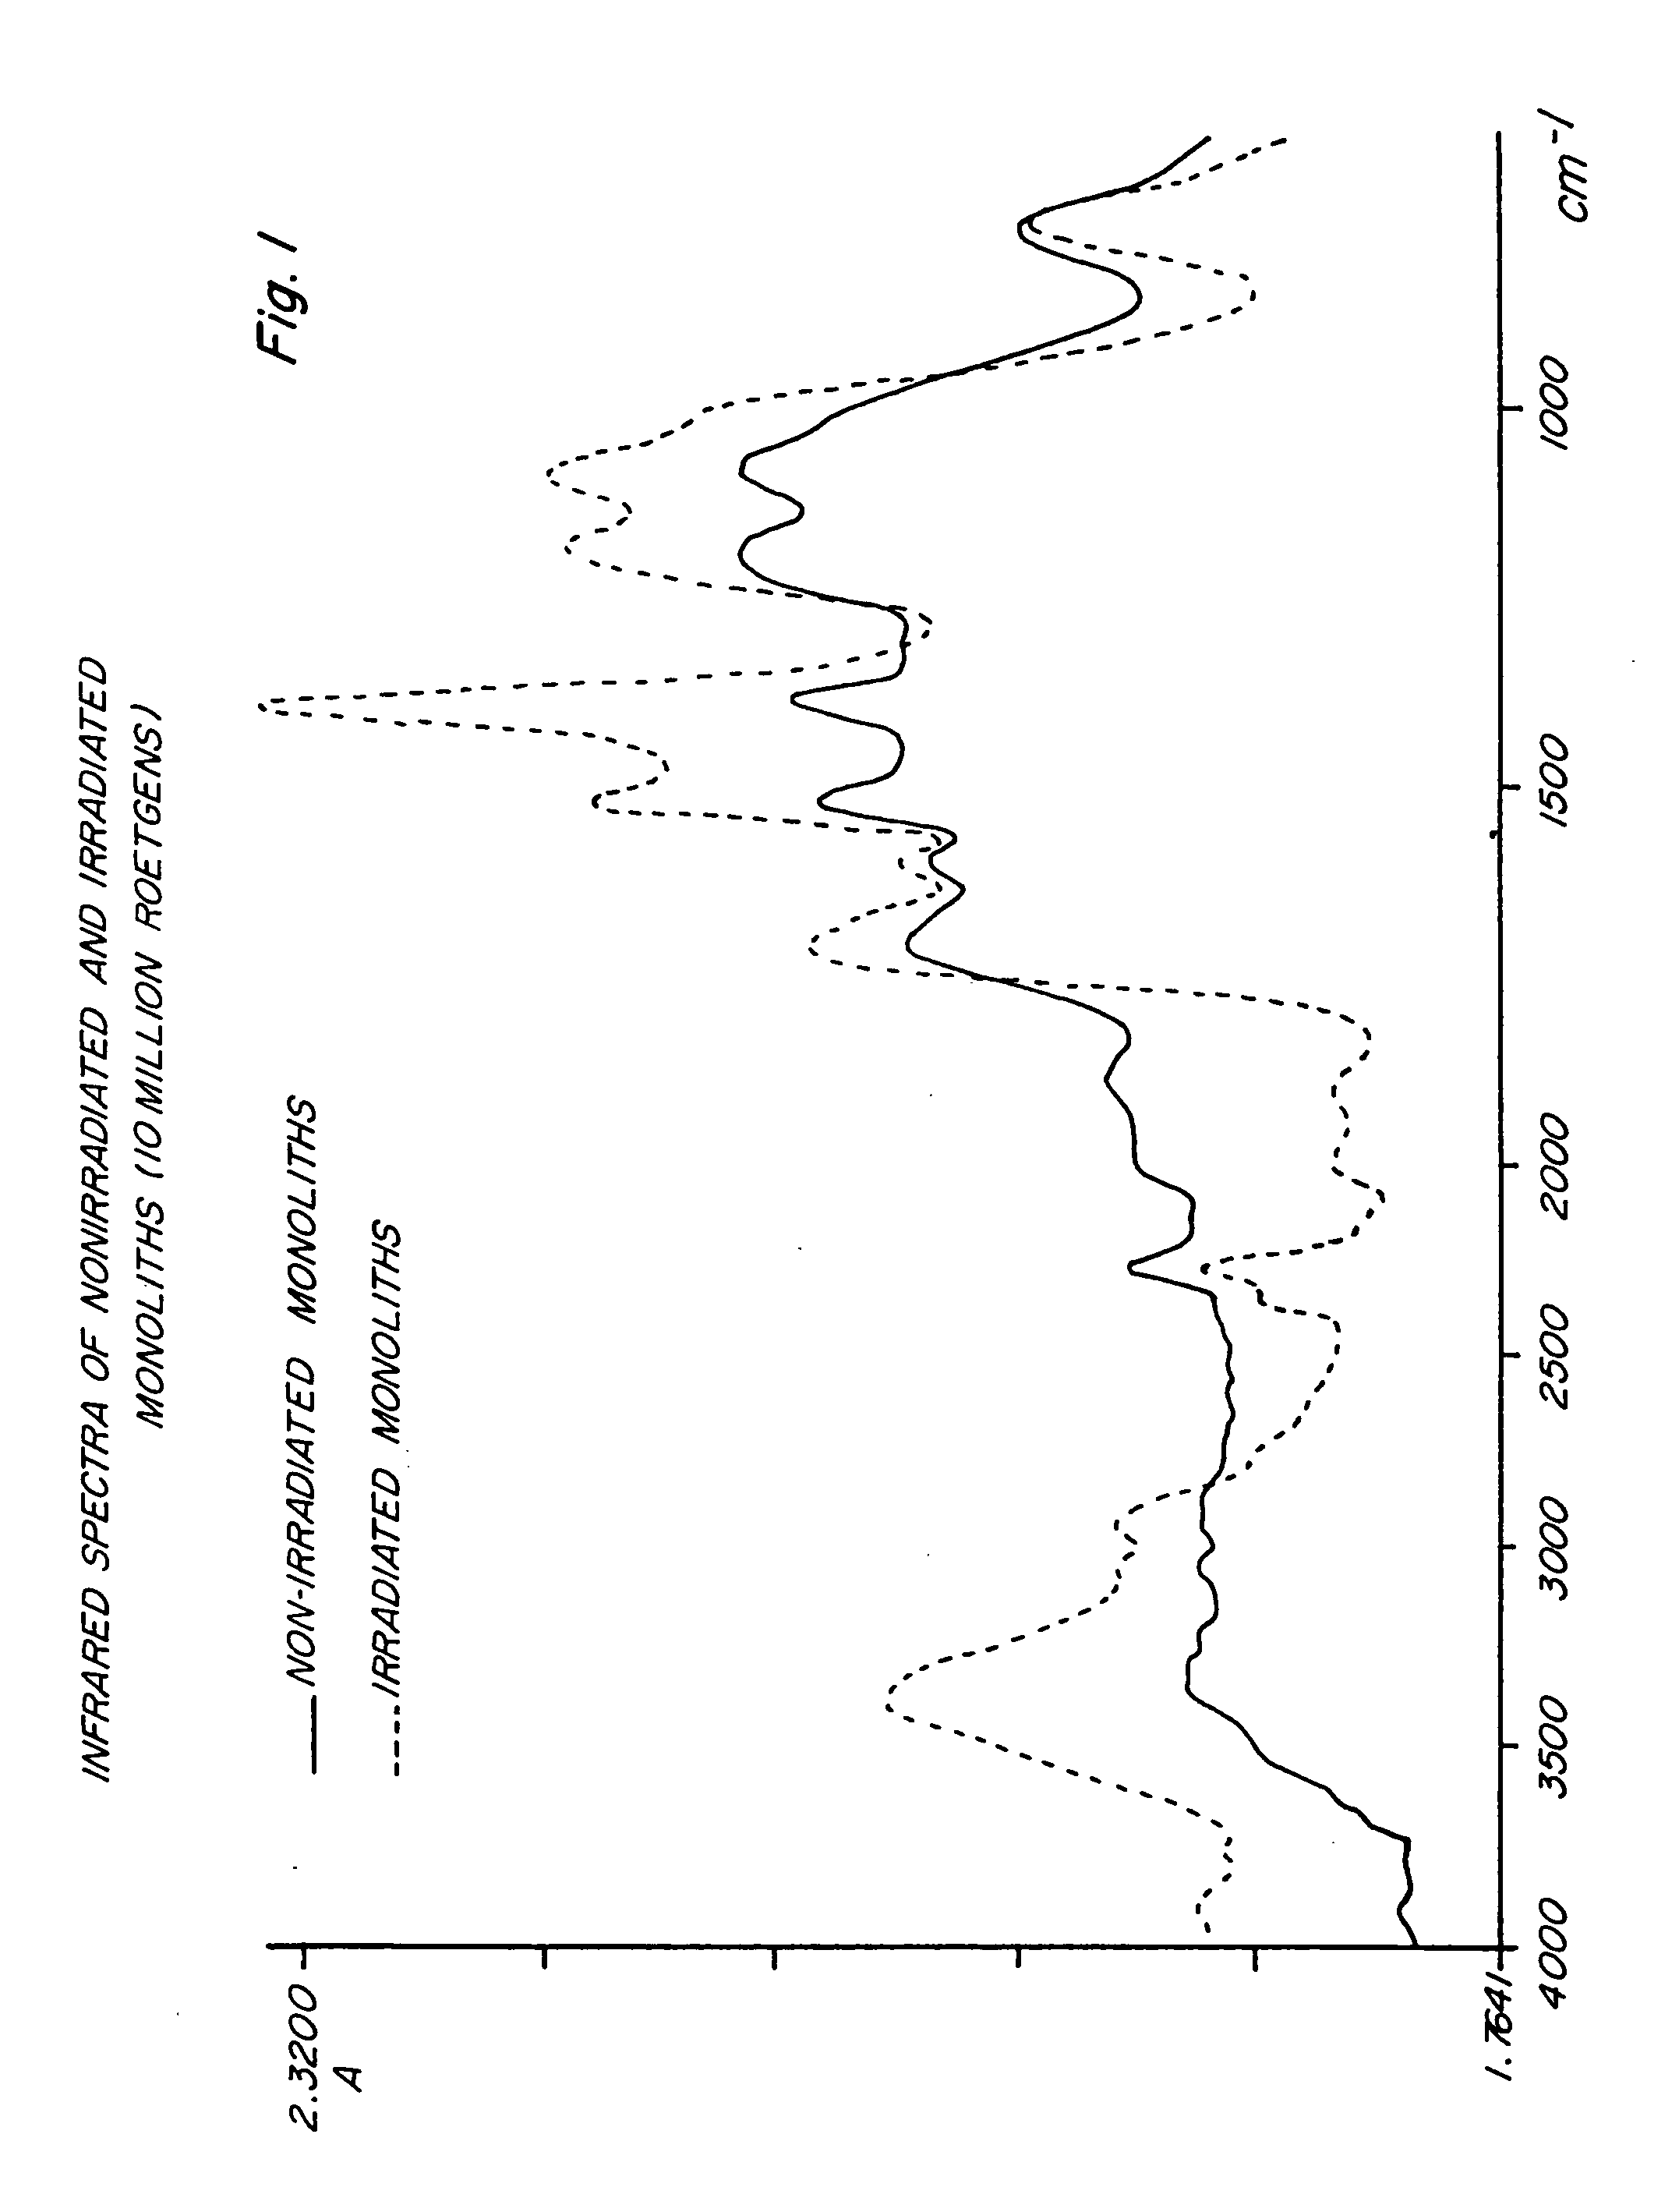 Polymer compositions and methods for shielding radioactivity